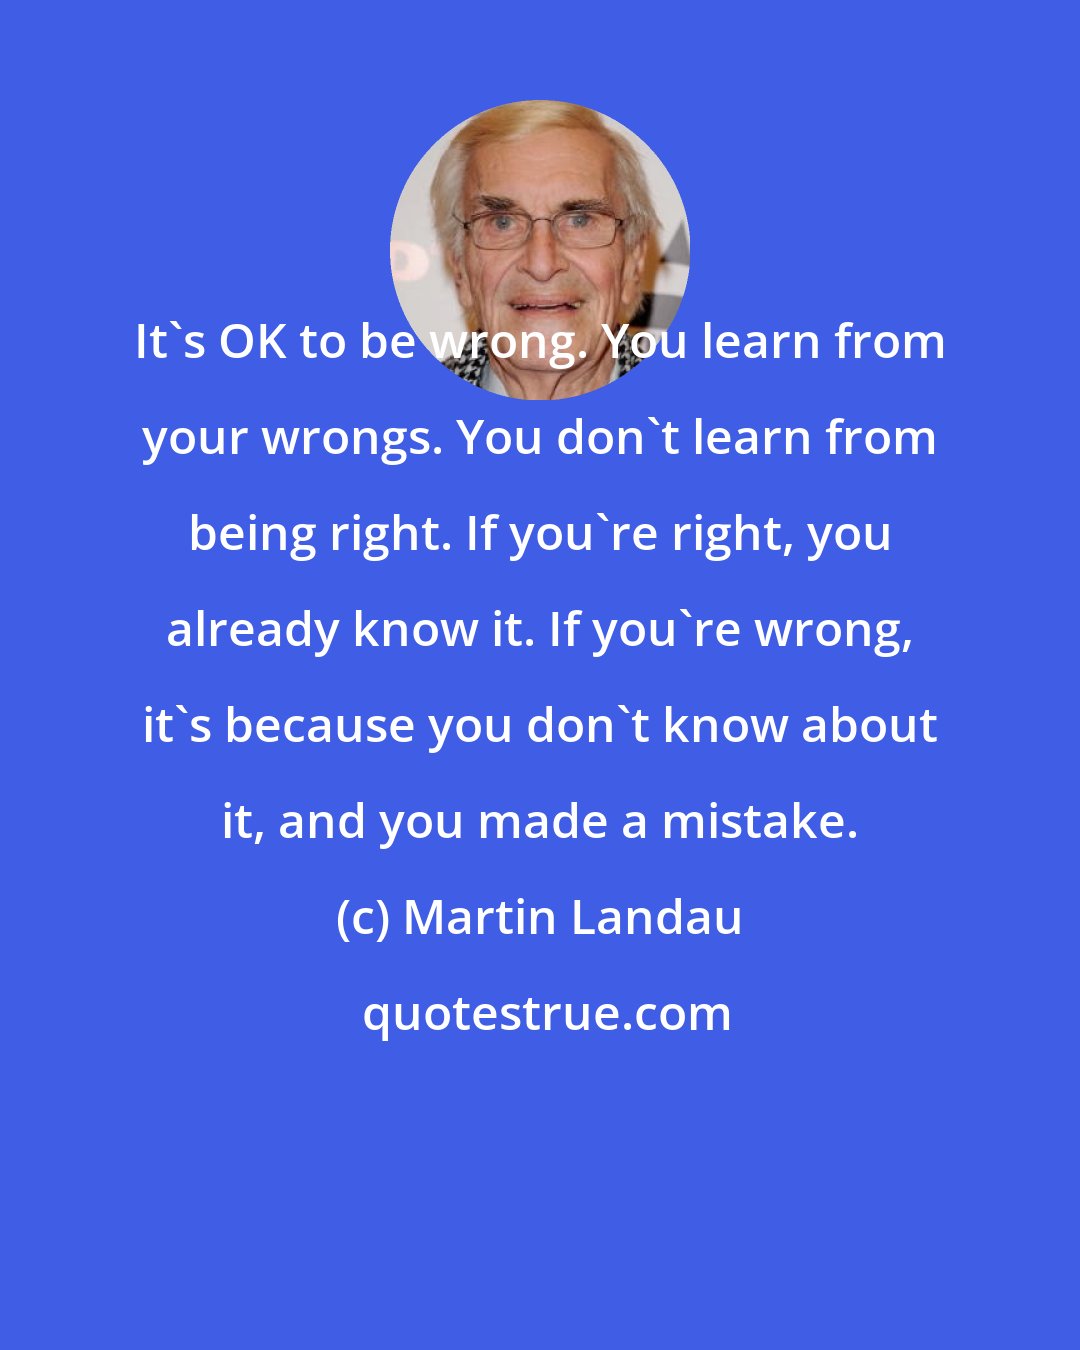 Martin Landau: It's OK to be wrong. You learn from your wrongs. You don't learn from being right. If you're right, you already know it. If you're wrong, it's because you don't know about it, and you made a mistake.